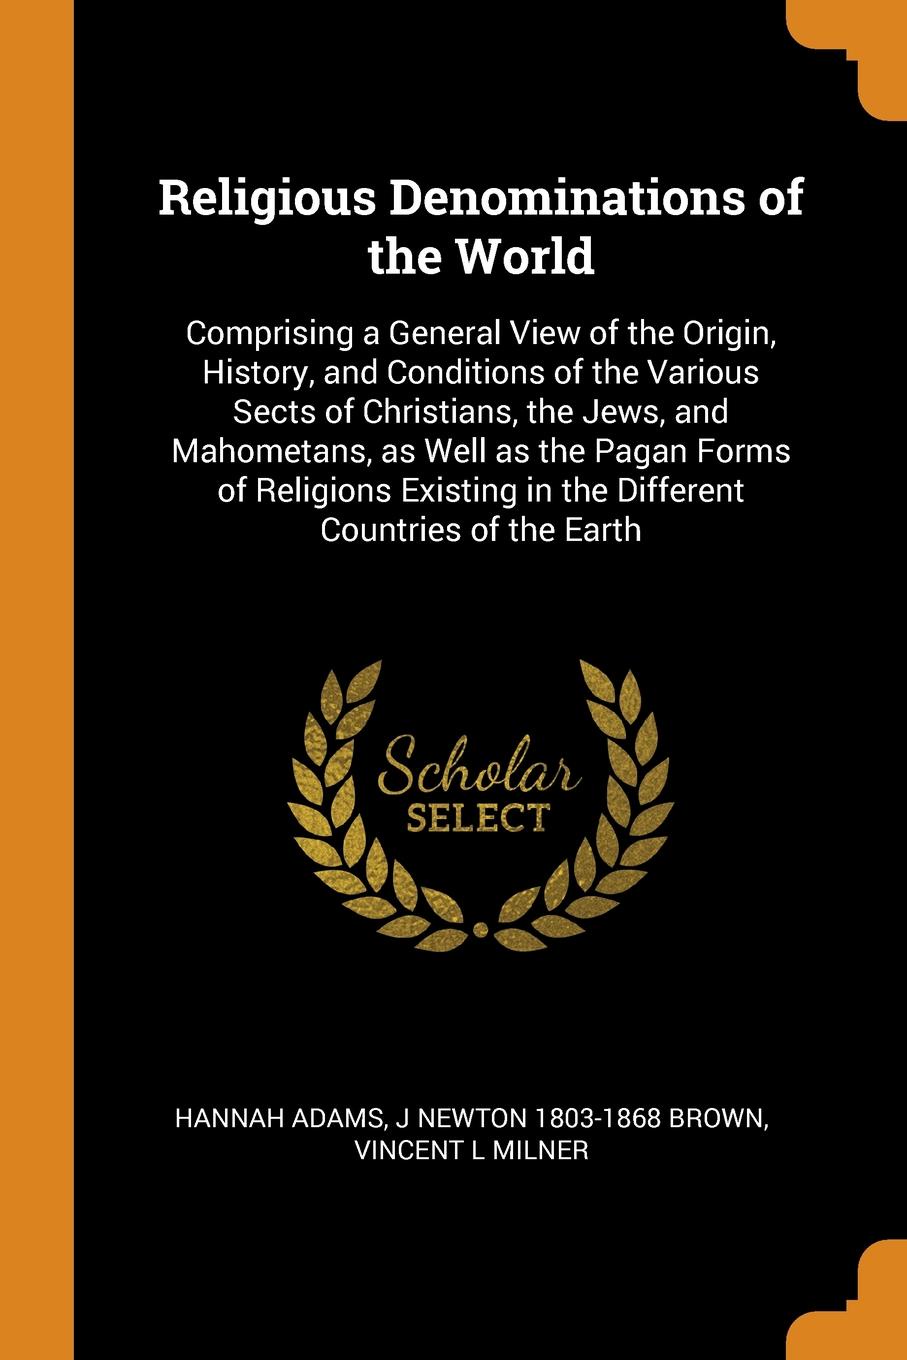 Religious Denominations of the World. Comprising a General View of the Origin, History, and Conditions of the Various Sects of Christians, the Jews, and Mahometans, as Well as the Pagan Forms of Religions Existing in the Different Countries of the...